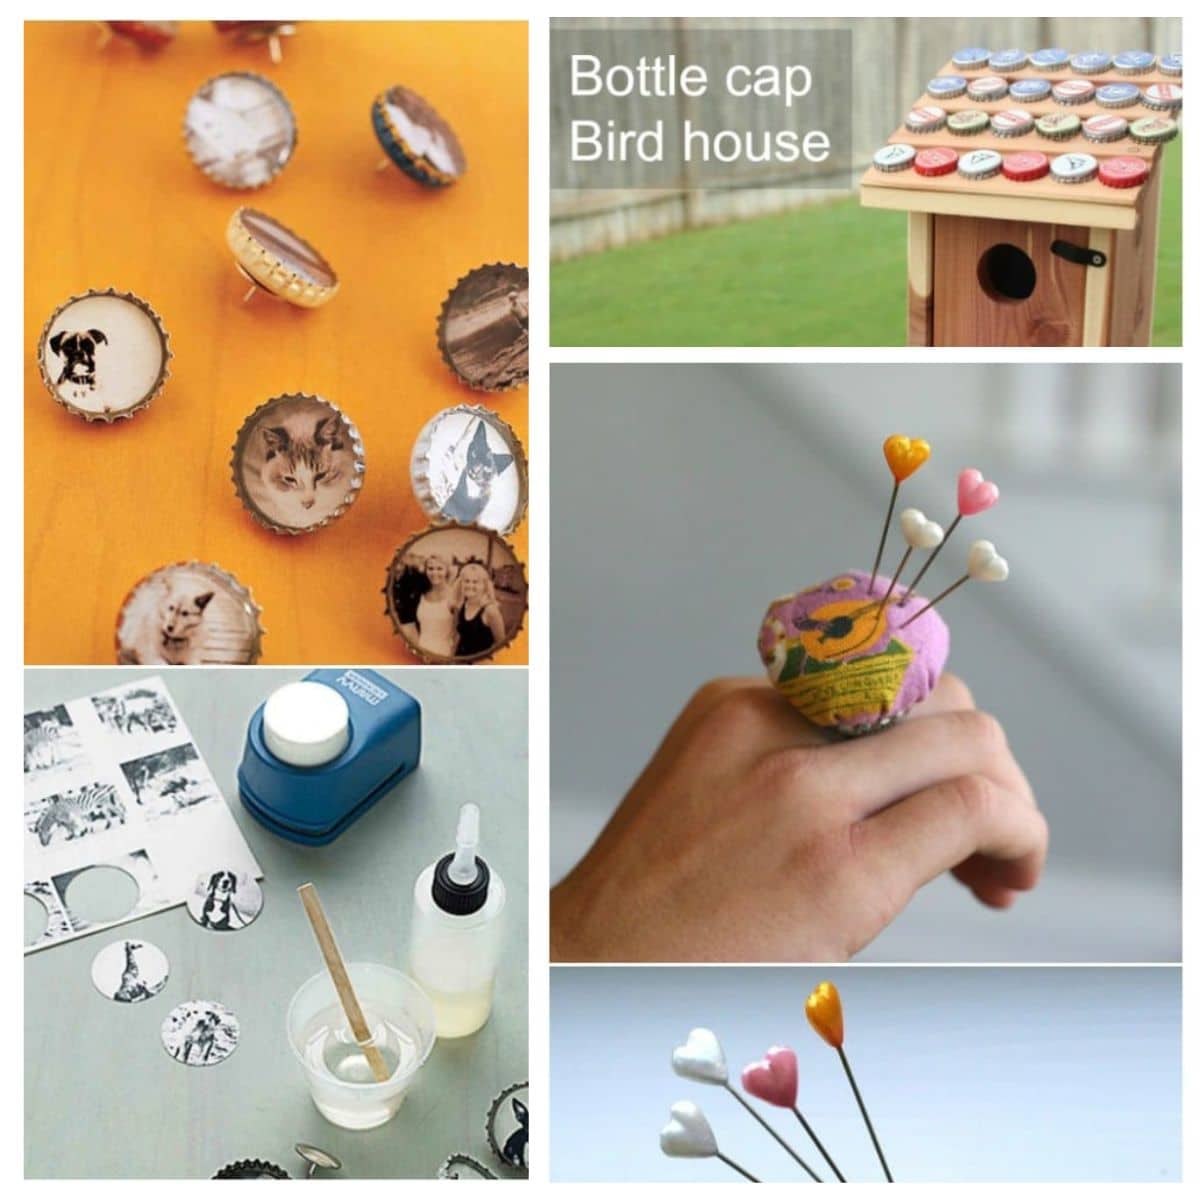 25 Bottle Cap Upcycling Projects That Add Flair To Your Home - DIY & Crafts